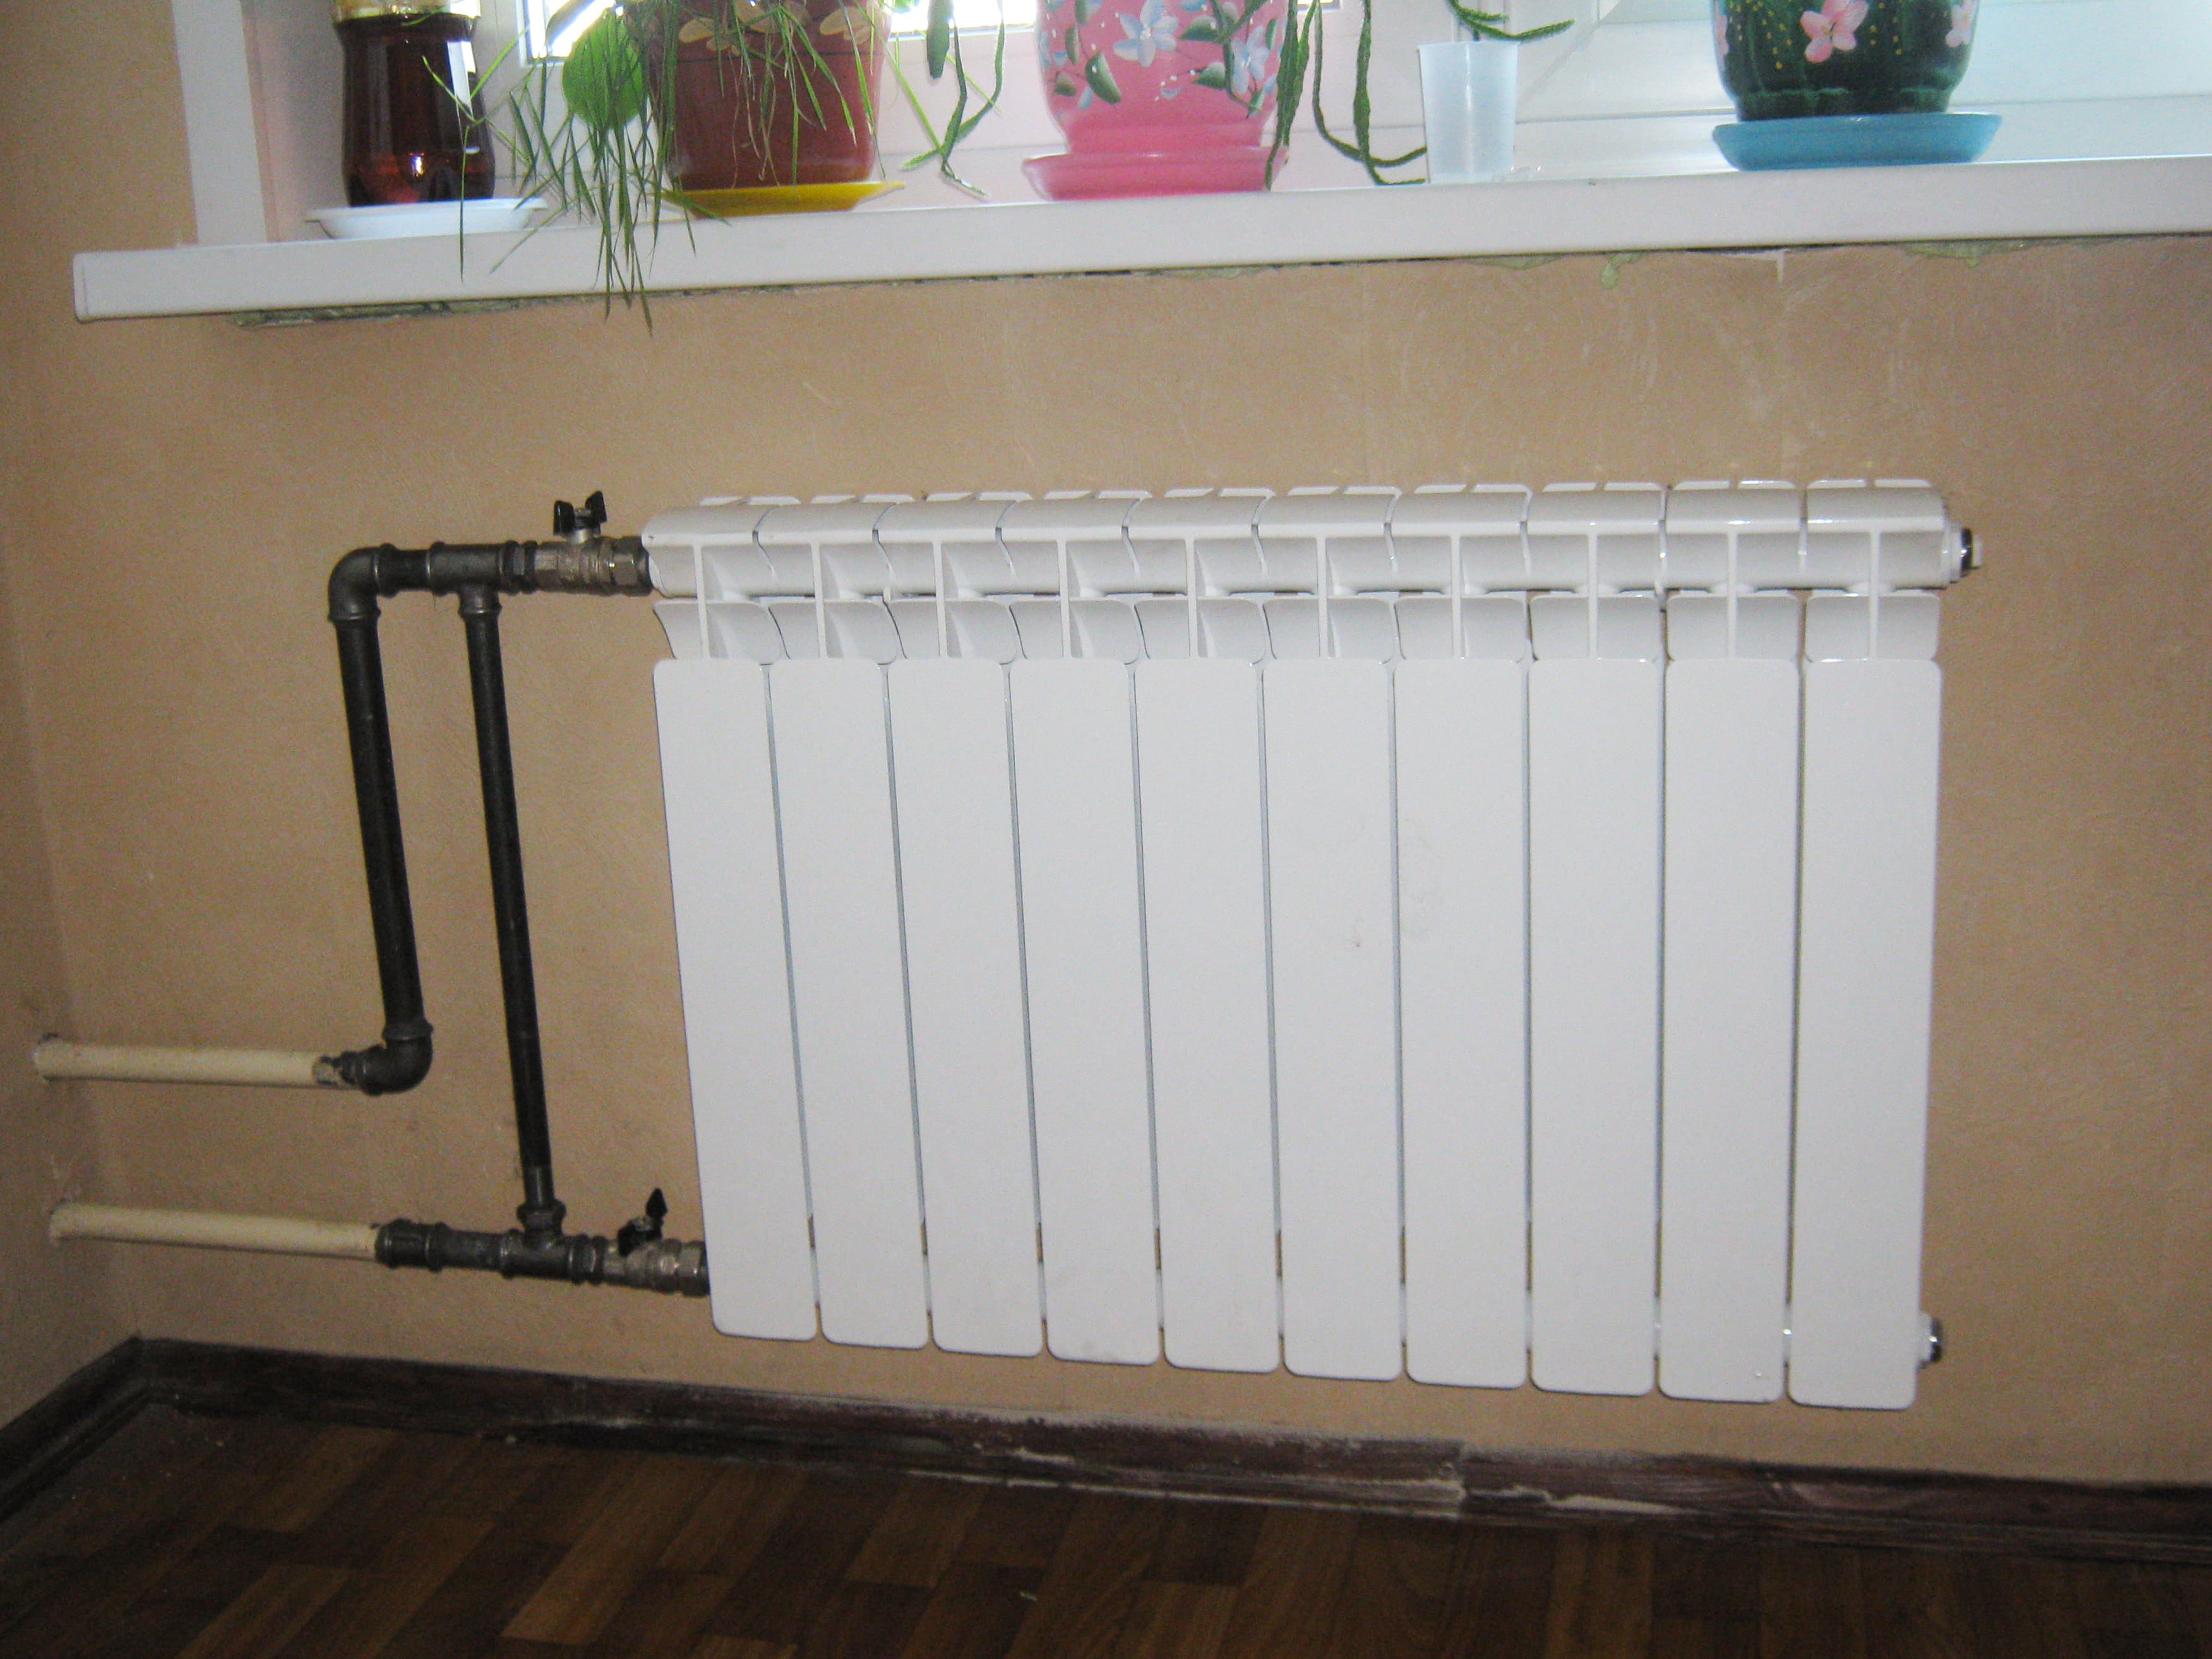 How to clean a radiator in an apartment